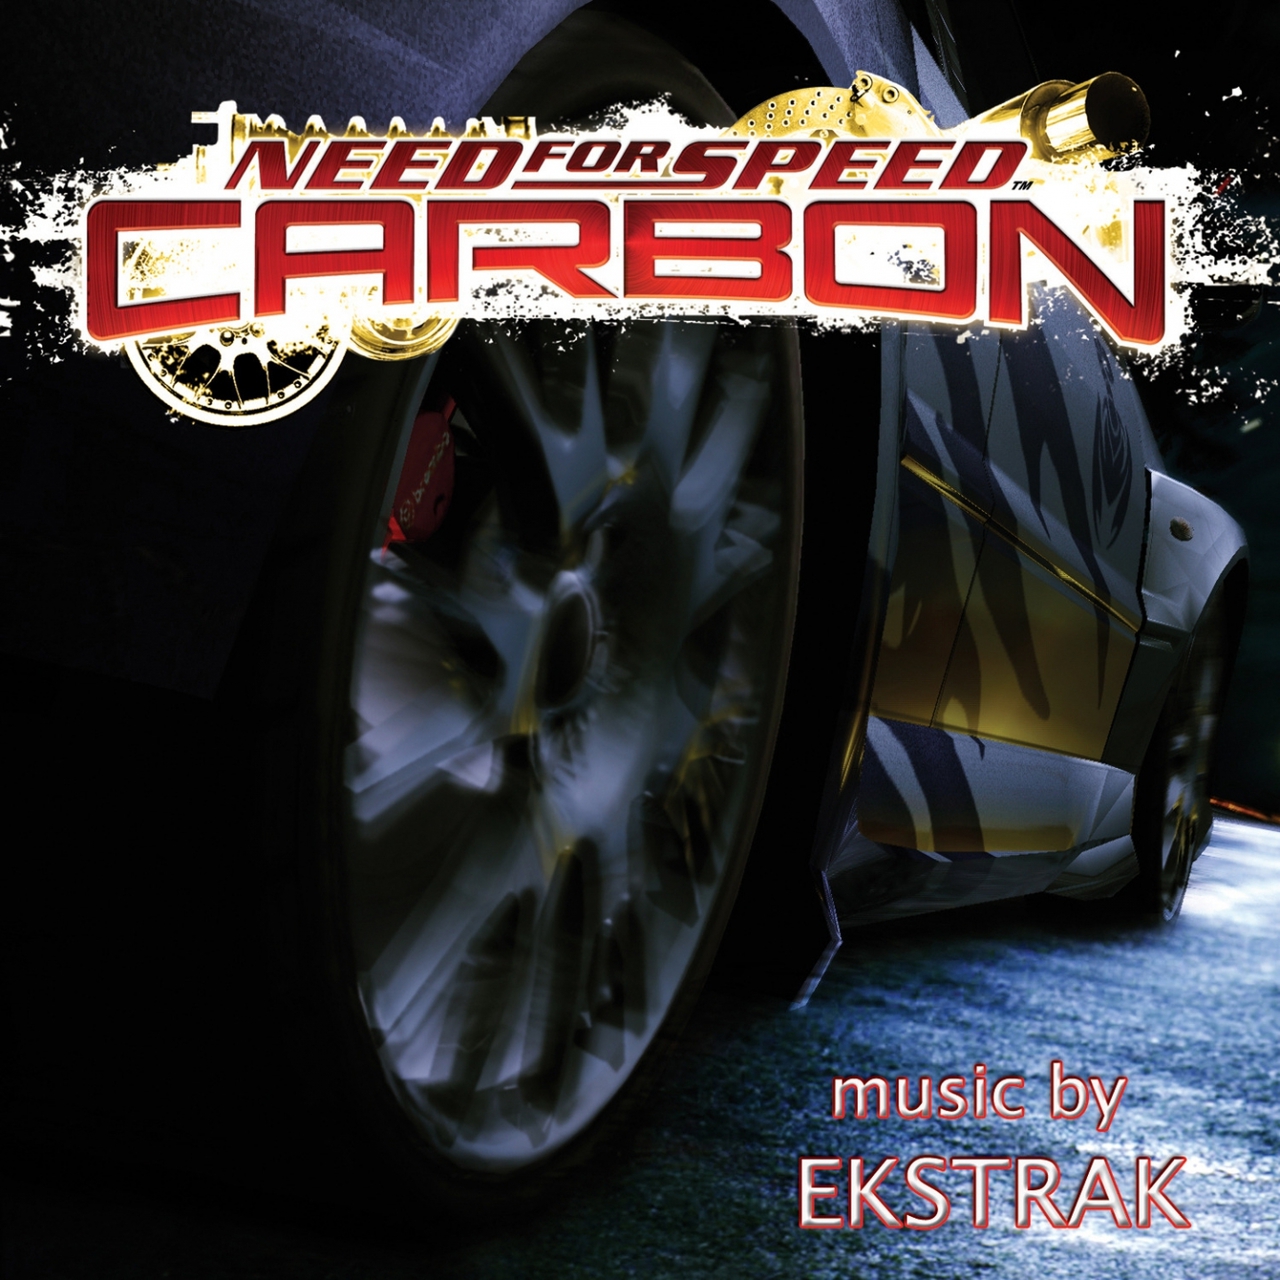 Need for Speed: Carbon Soundtrack.